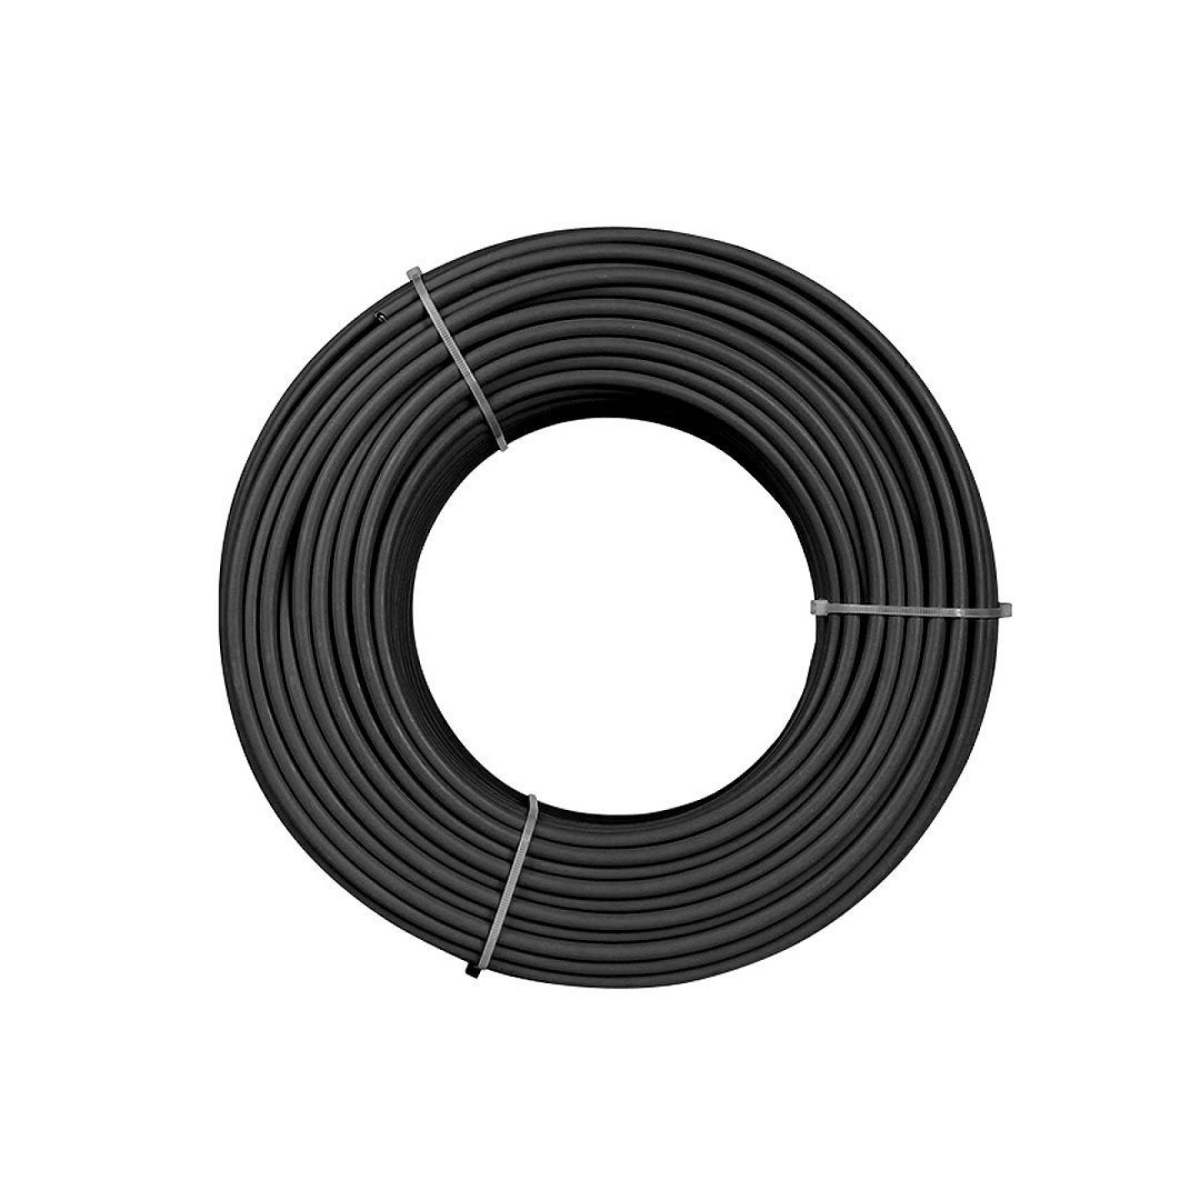 TommaTech 6,0 mm Solar Cable PVI1-F Black 1 Meter